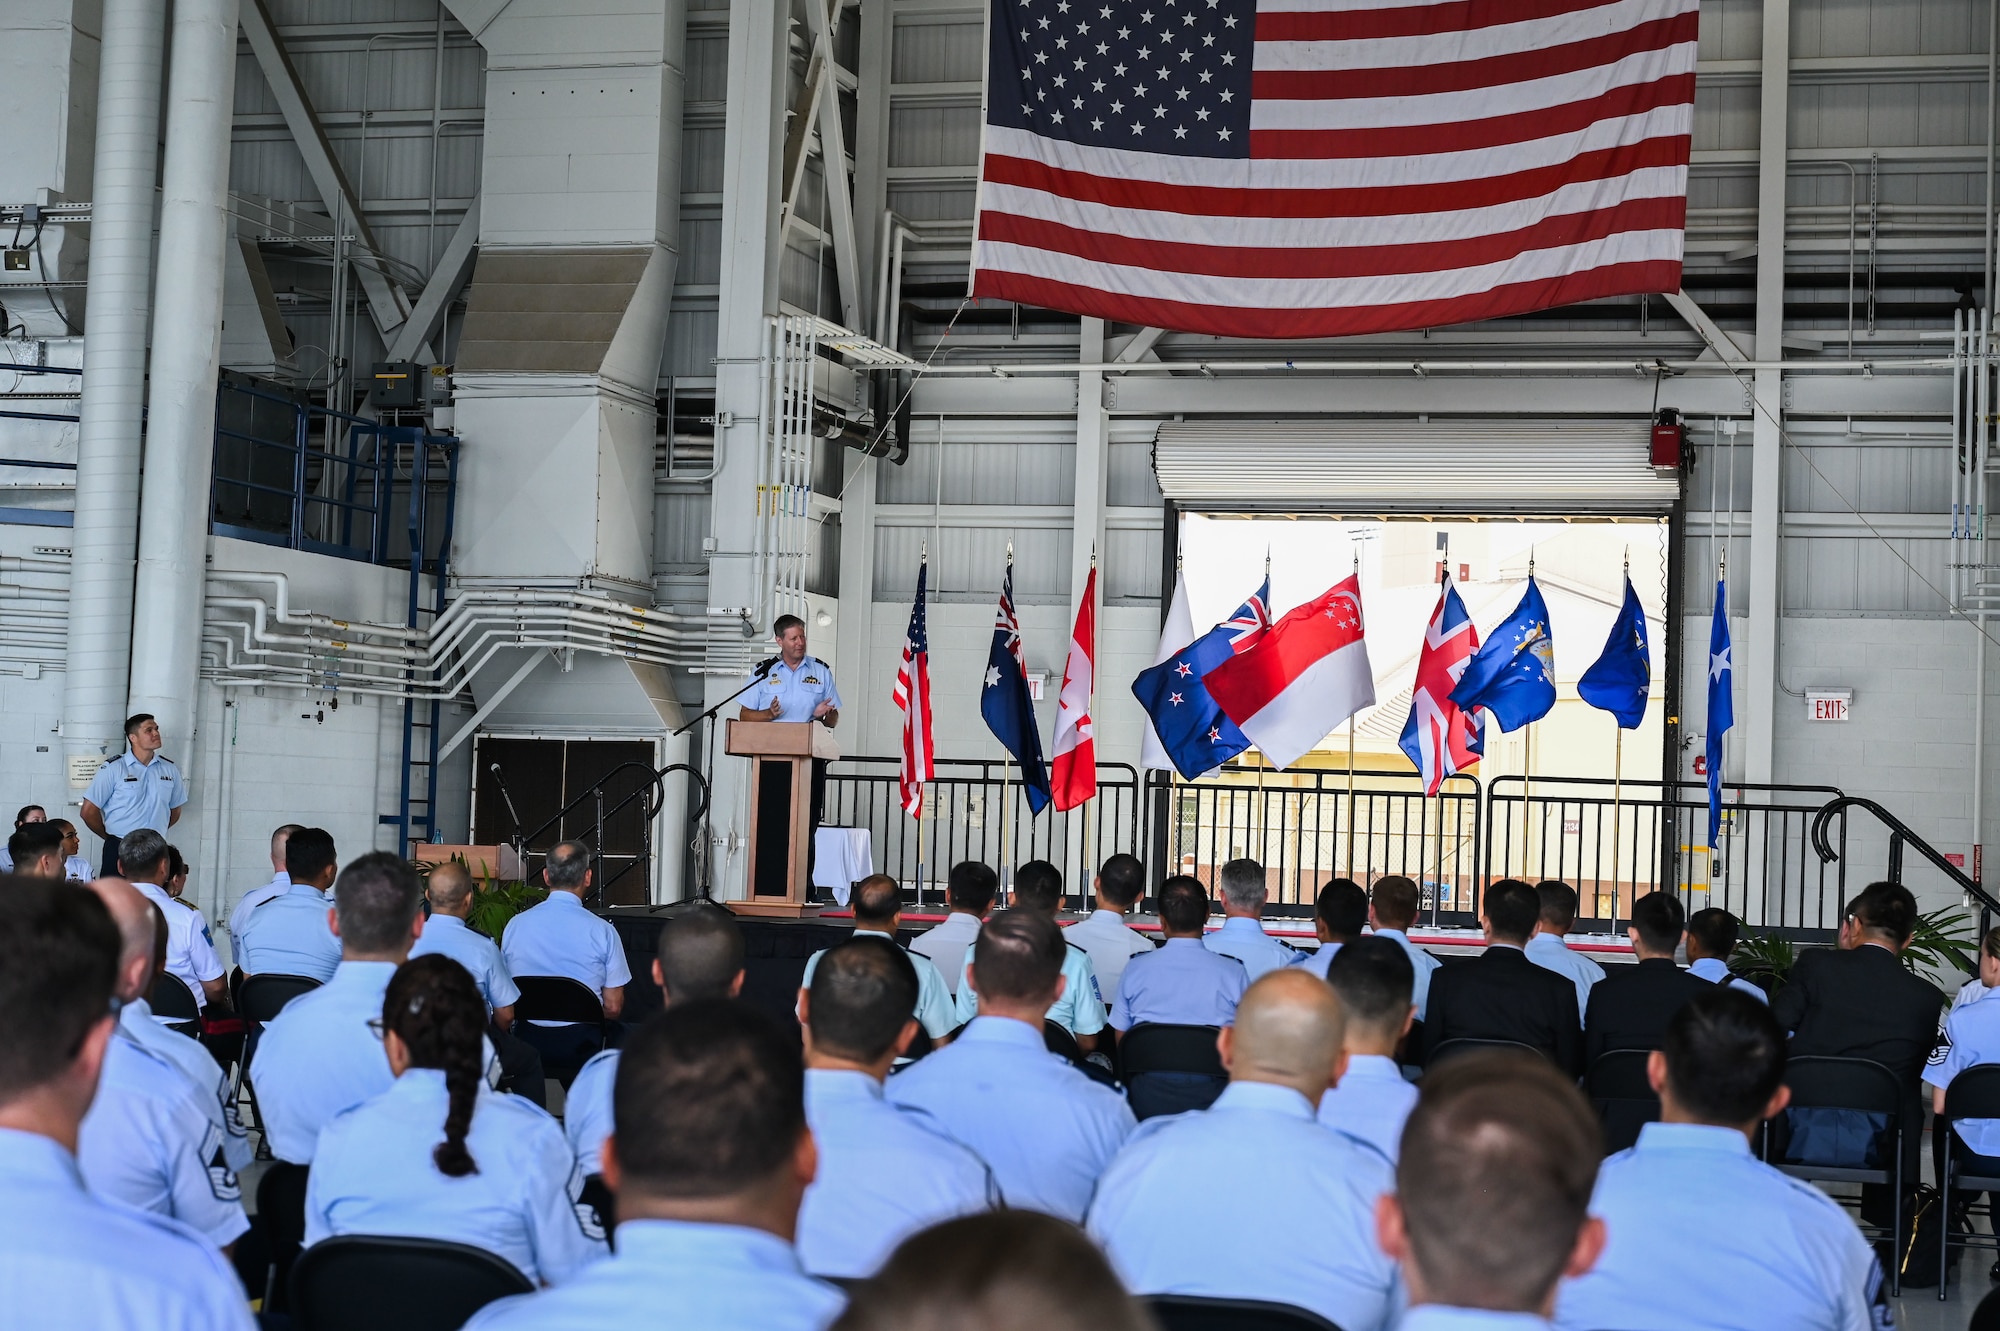 Royal Australian Air Force Air Vice-Marshal Carl Newman, Pacific Air Forces deputy commander, delivers a keynote address during the graduation ceremony of the inaugural Inter-Pacific Air Forces Academy class, Joint Base Pearl Harbor-Hickam, Hawaii, November 16, 2023. IPAFA is similar to the existing Inter-European Air Forces Academy and Inter-American Air Forces Academy, which enroll international students from Allied and partner nations within their respective regions. Those schools feature multiple courses that target different ranks and technical specialties. (U.S. Air Force photo by Tech. Sgt. Hailey Haux)